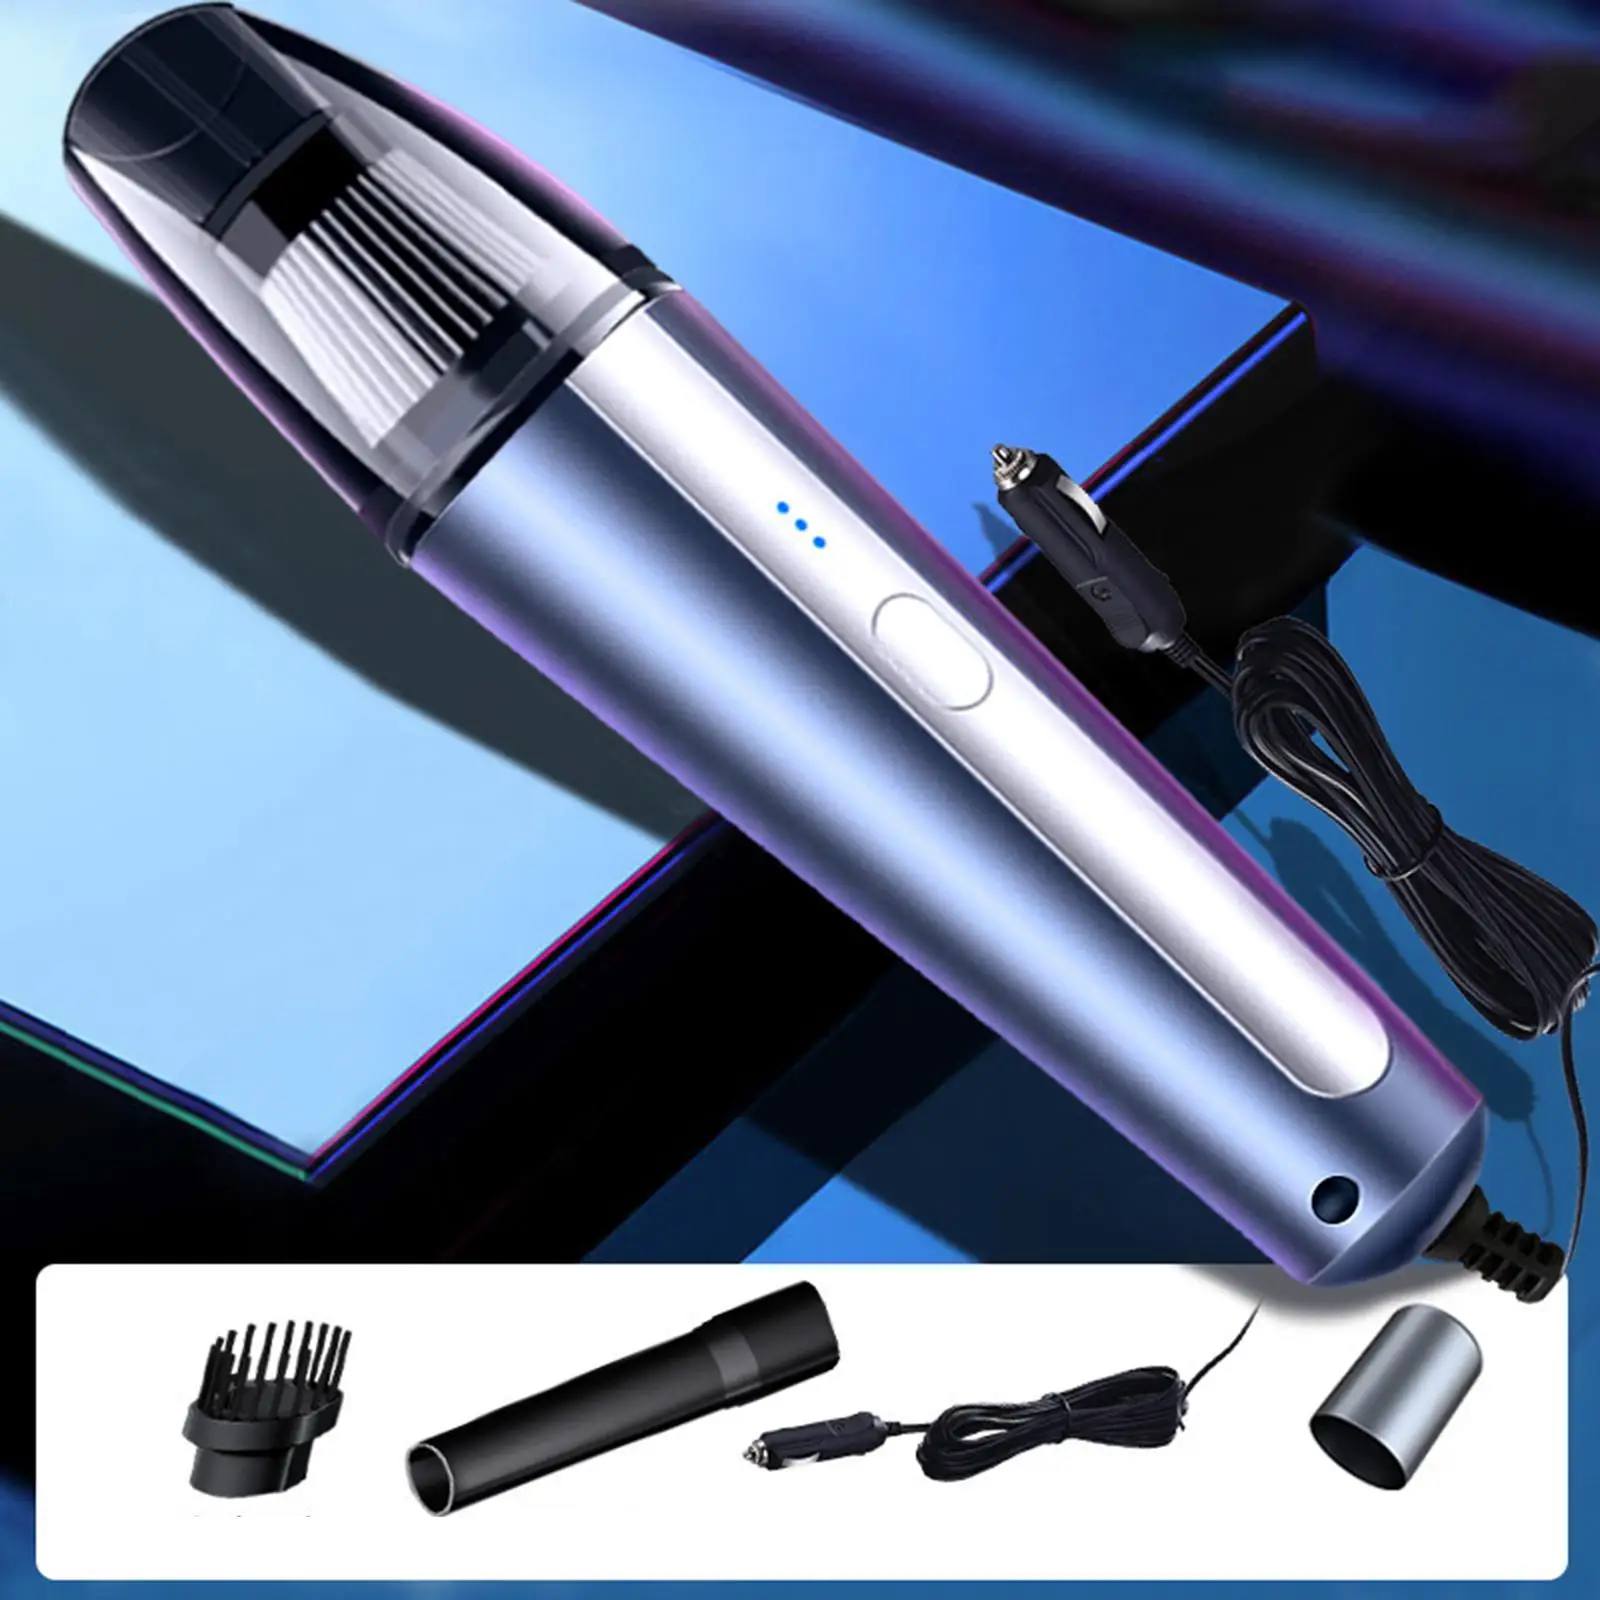 Handheld Cars Vacuum Cleaner 6000PA Dry and Wet Use Vacuum Cleaning 2 Nozzles Cyclone Suction for Home Office Vehicle Parts